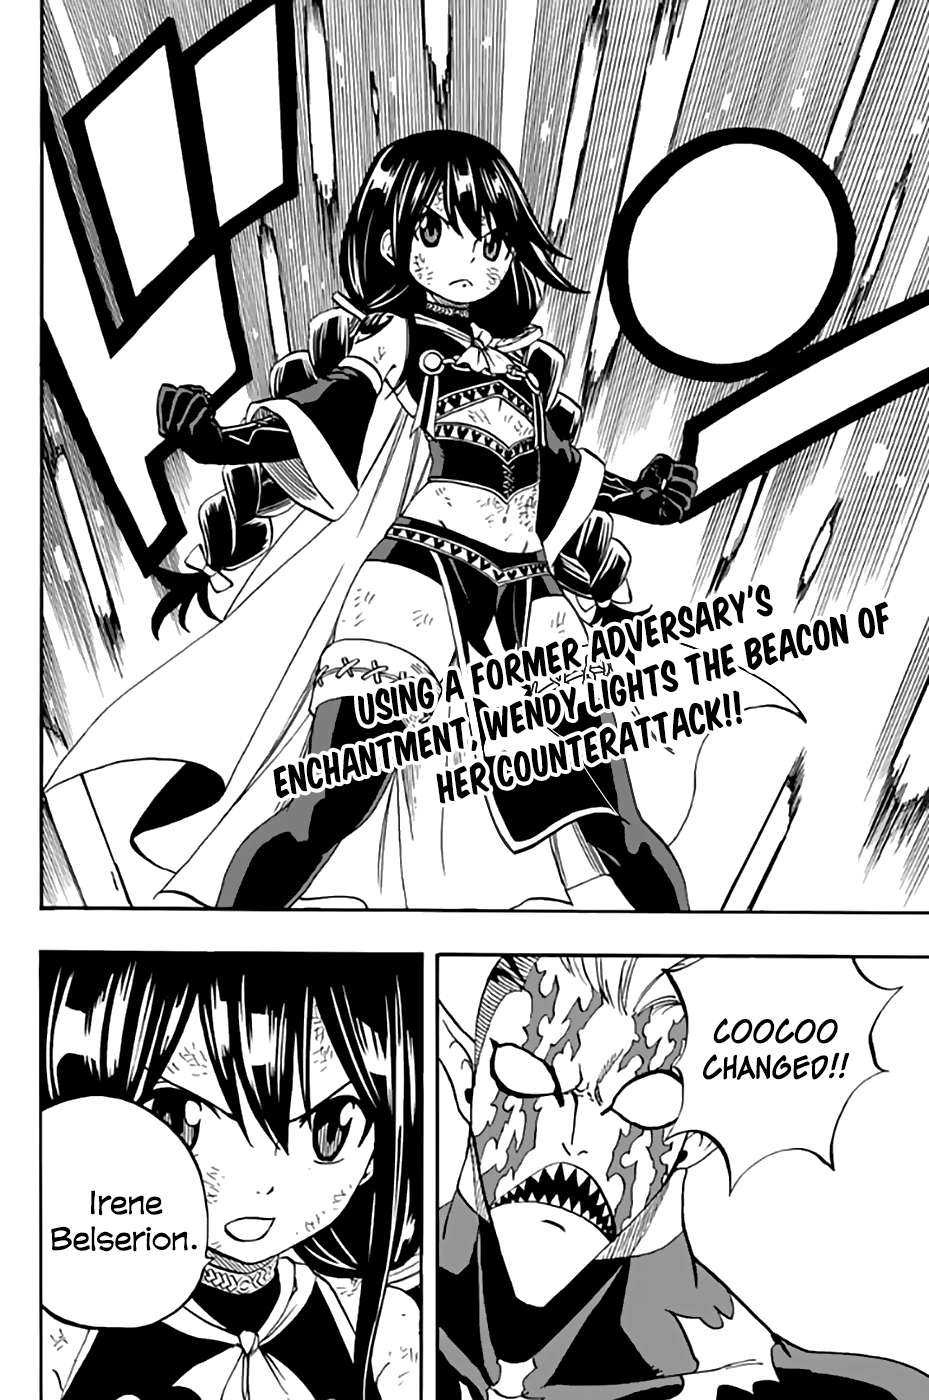 Fairy Tail: 100 Year Quest